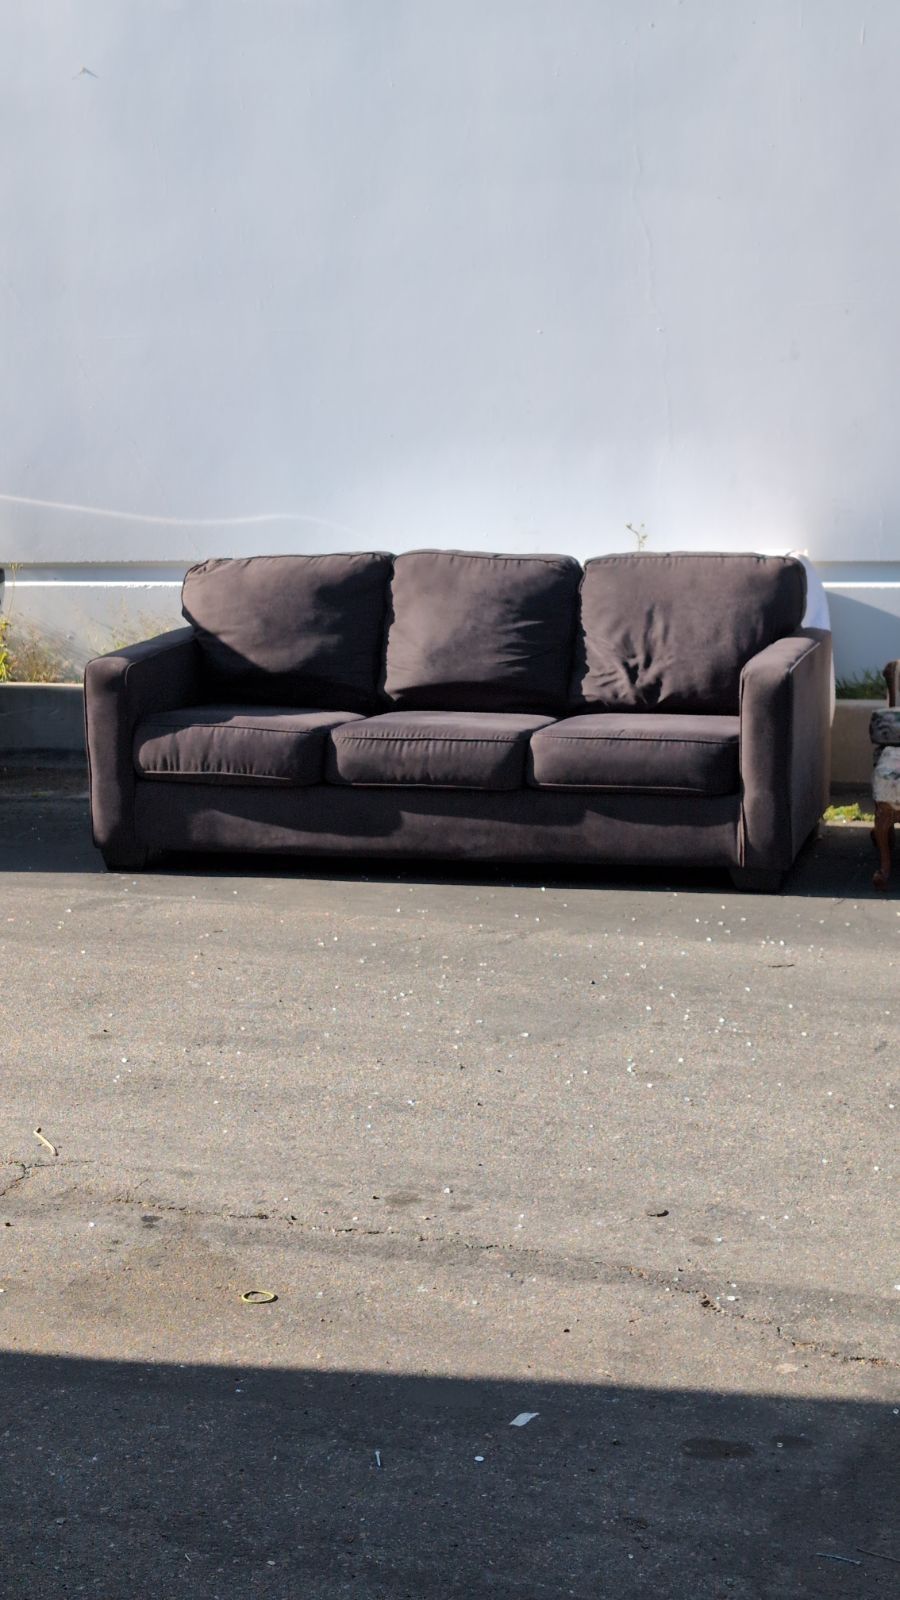 Free Couch N Good condition. City Of Orange